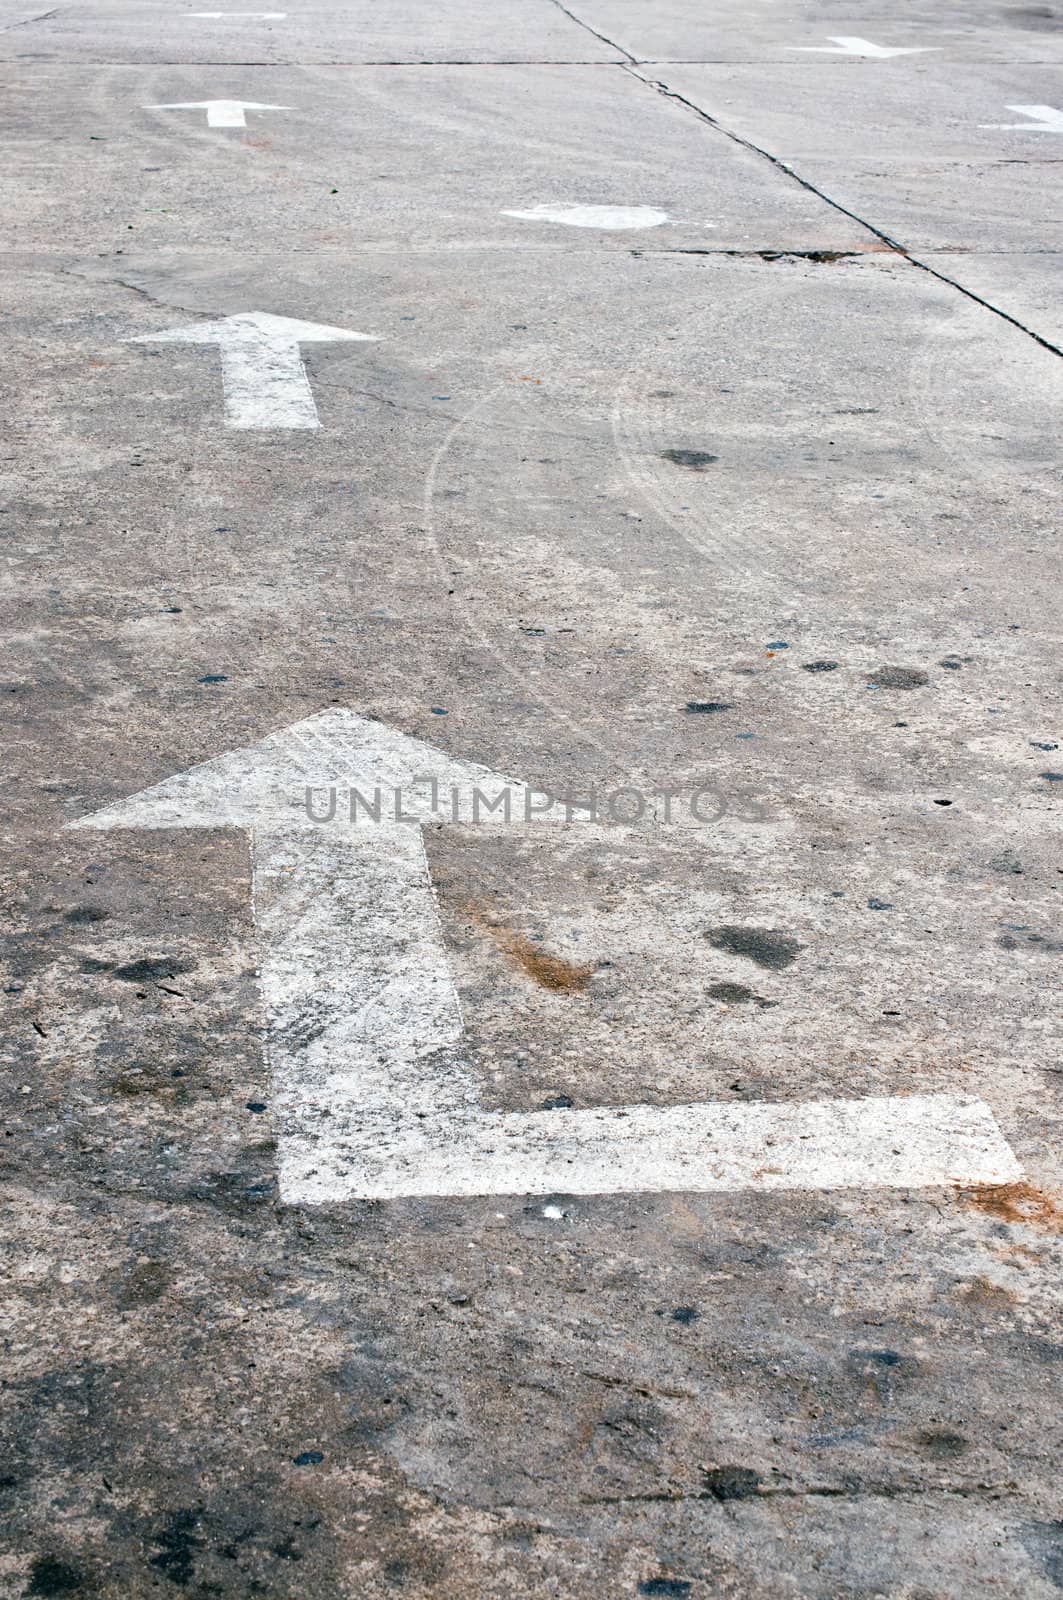 Old white arrow marking on road by sayhmog